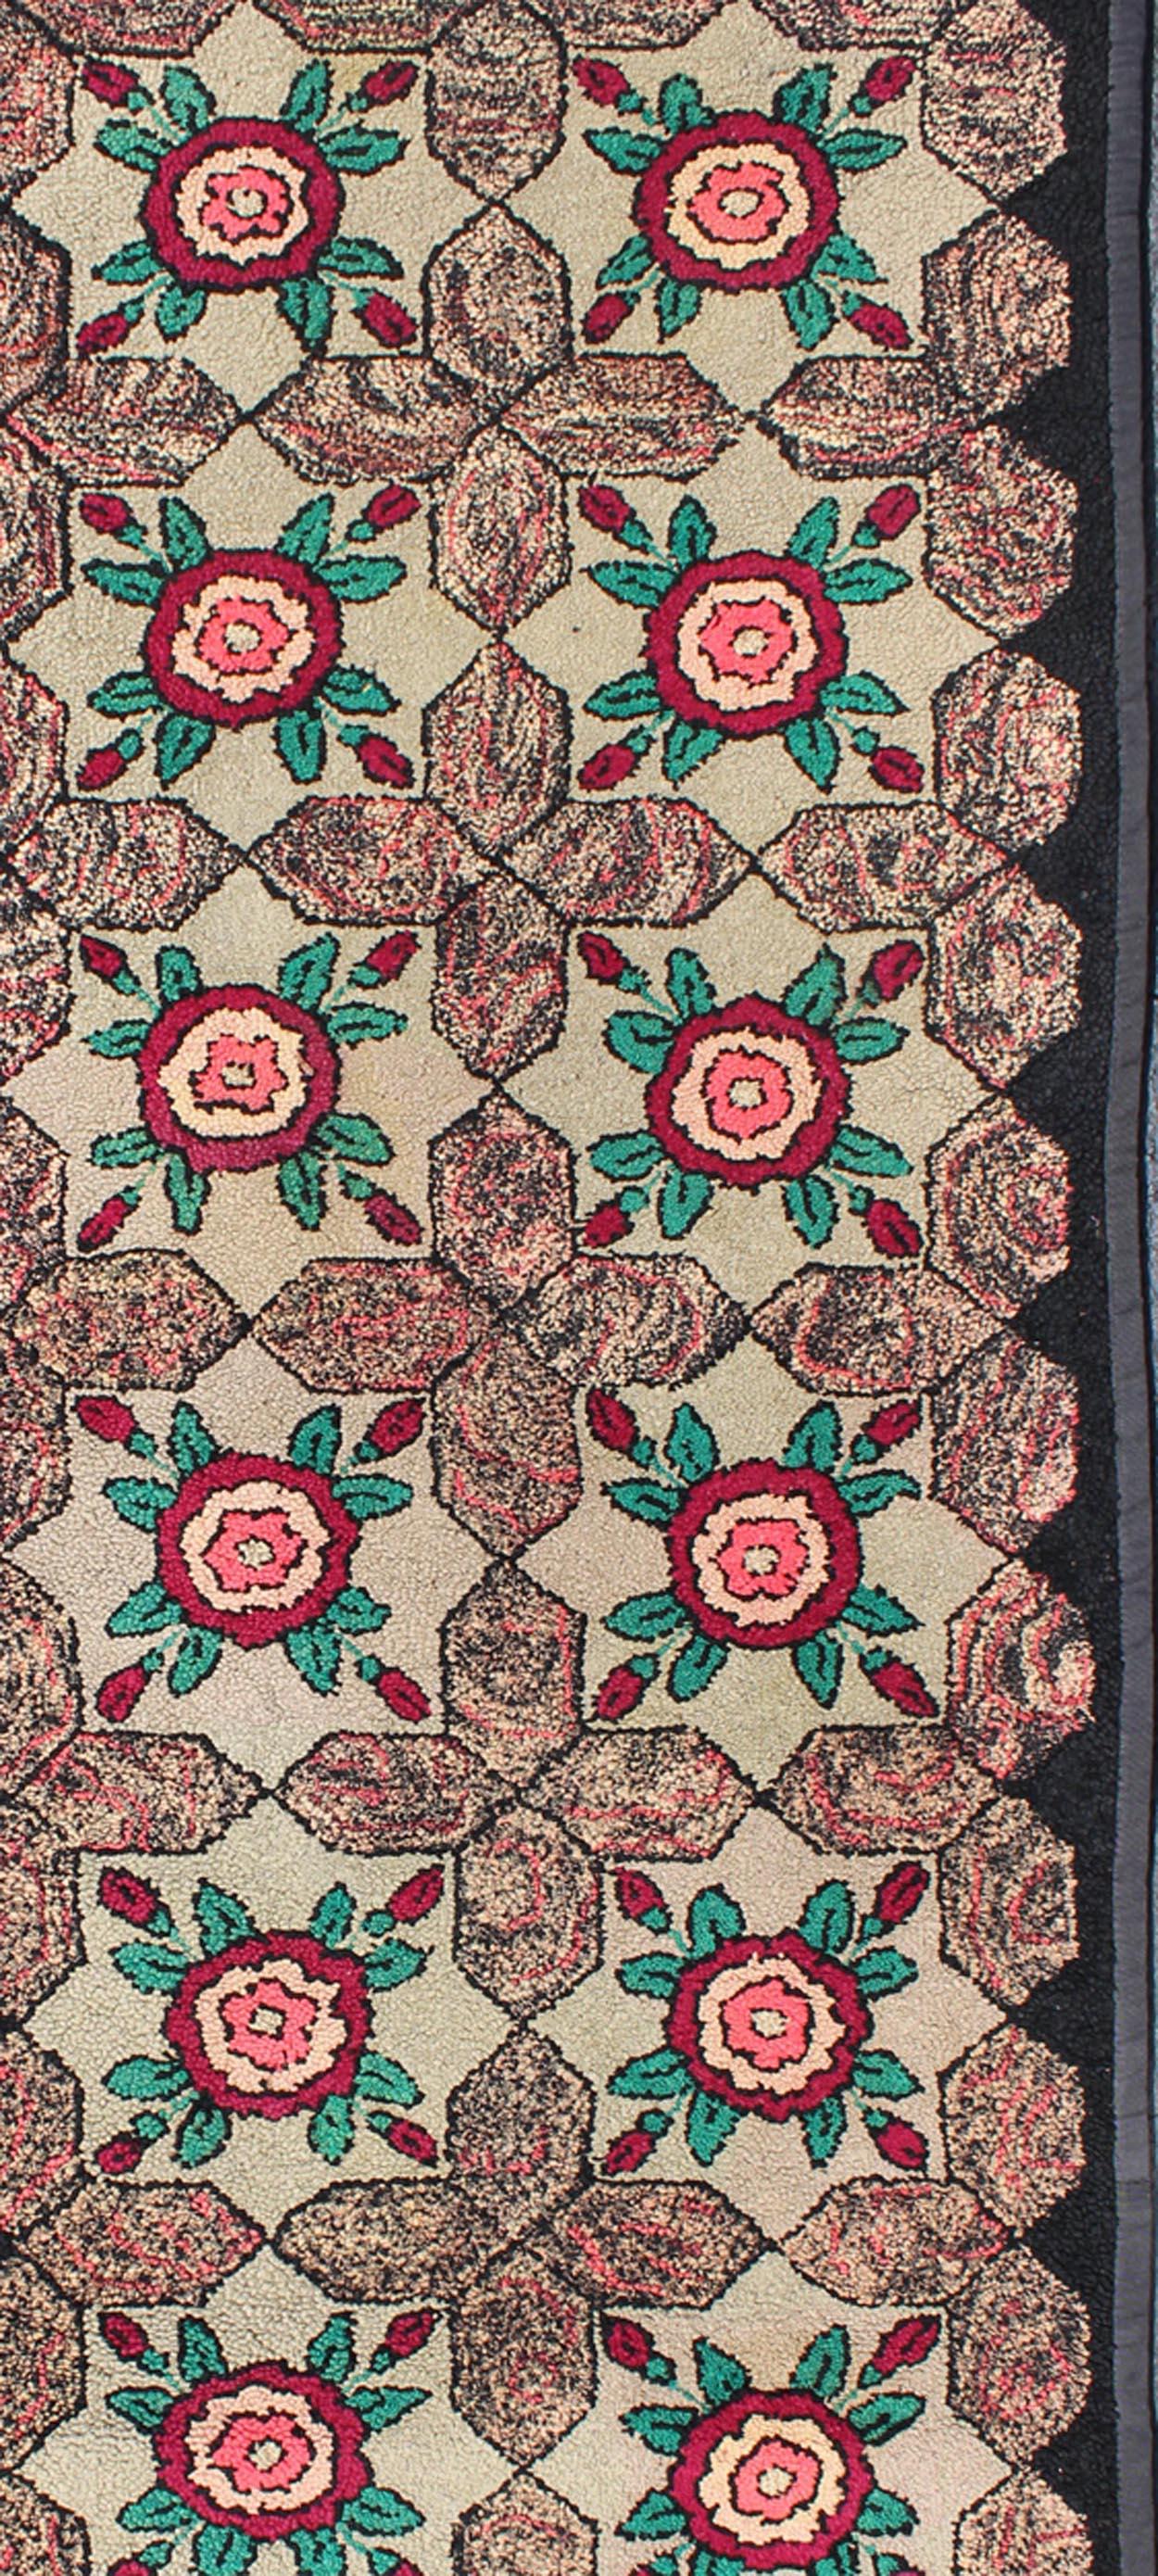 Wool Repeating Floral-Leaf Design American Hooked Rug in Brown, Green, and Red For Sale